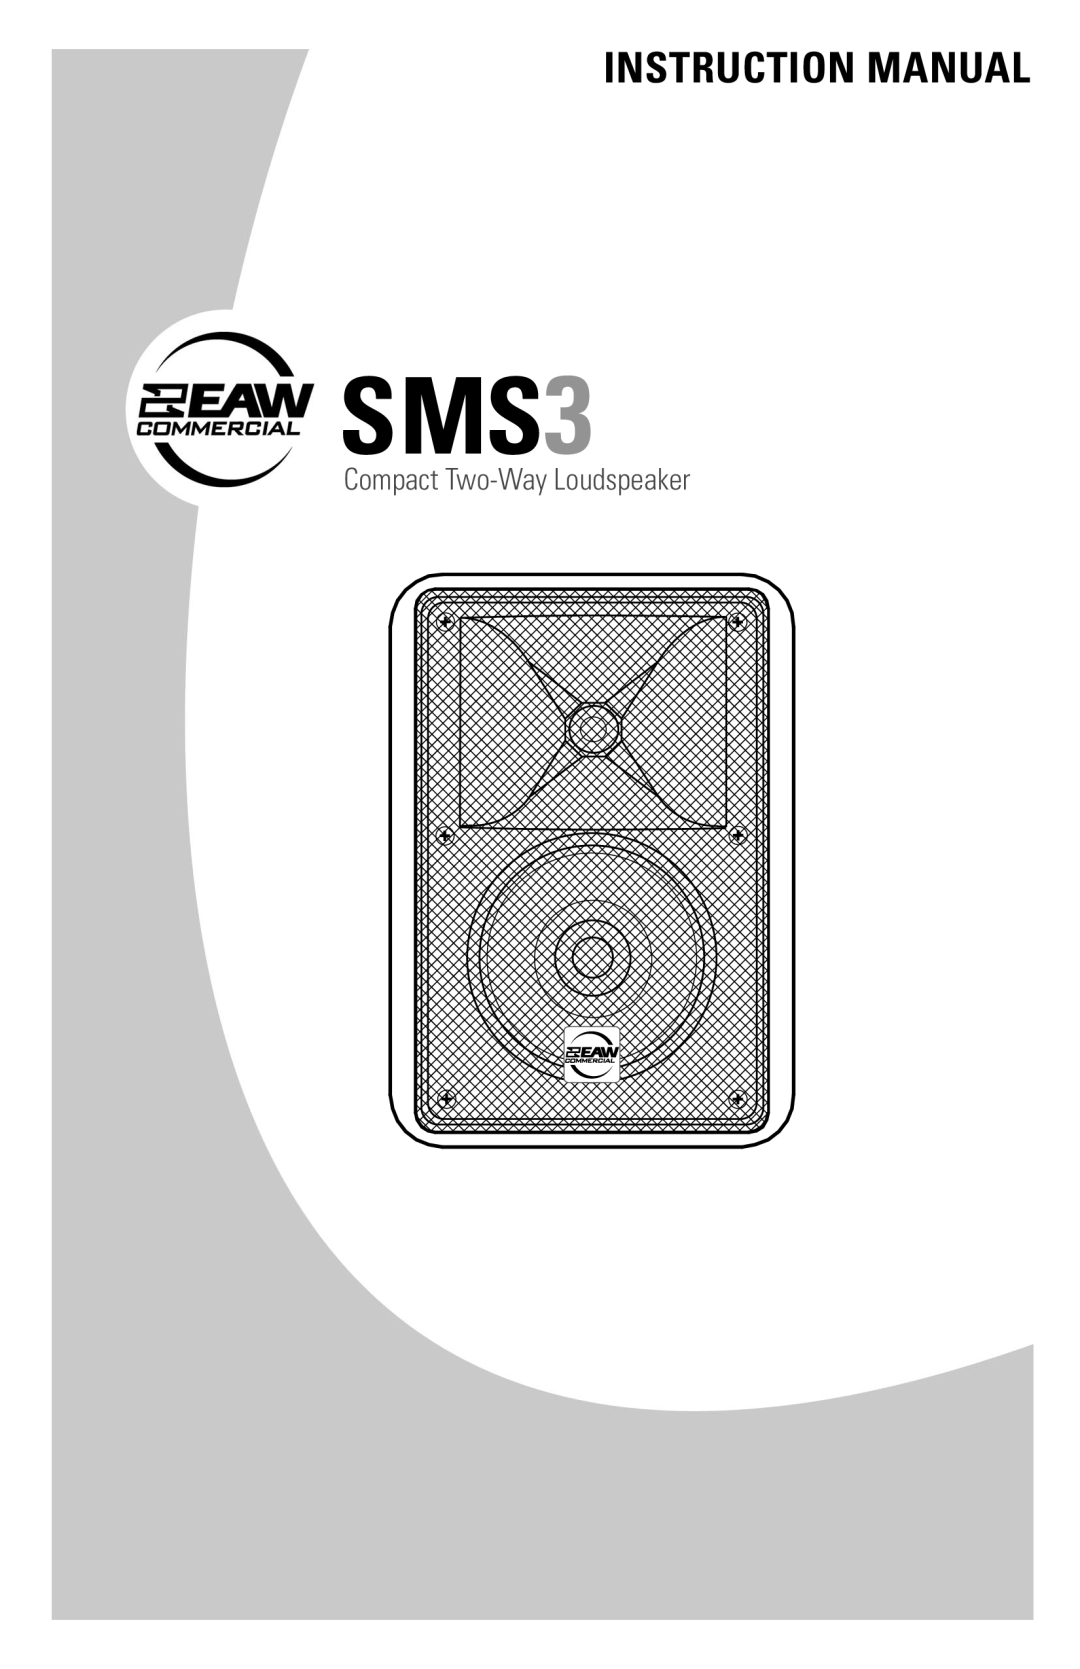 EAW SMS3 instruction manual Instruction Manual, Compact Two-Way Loudspeaker 